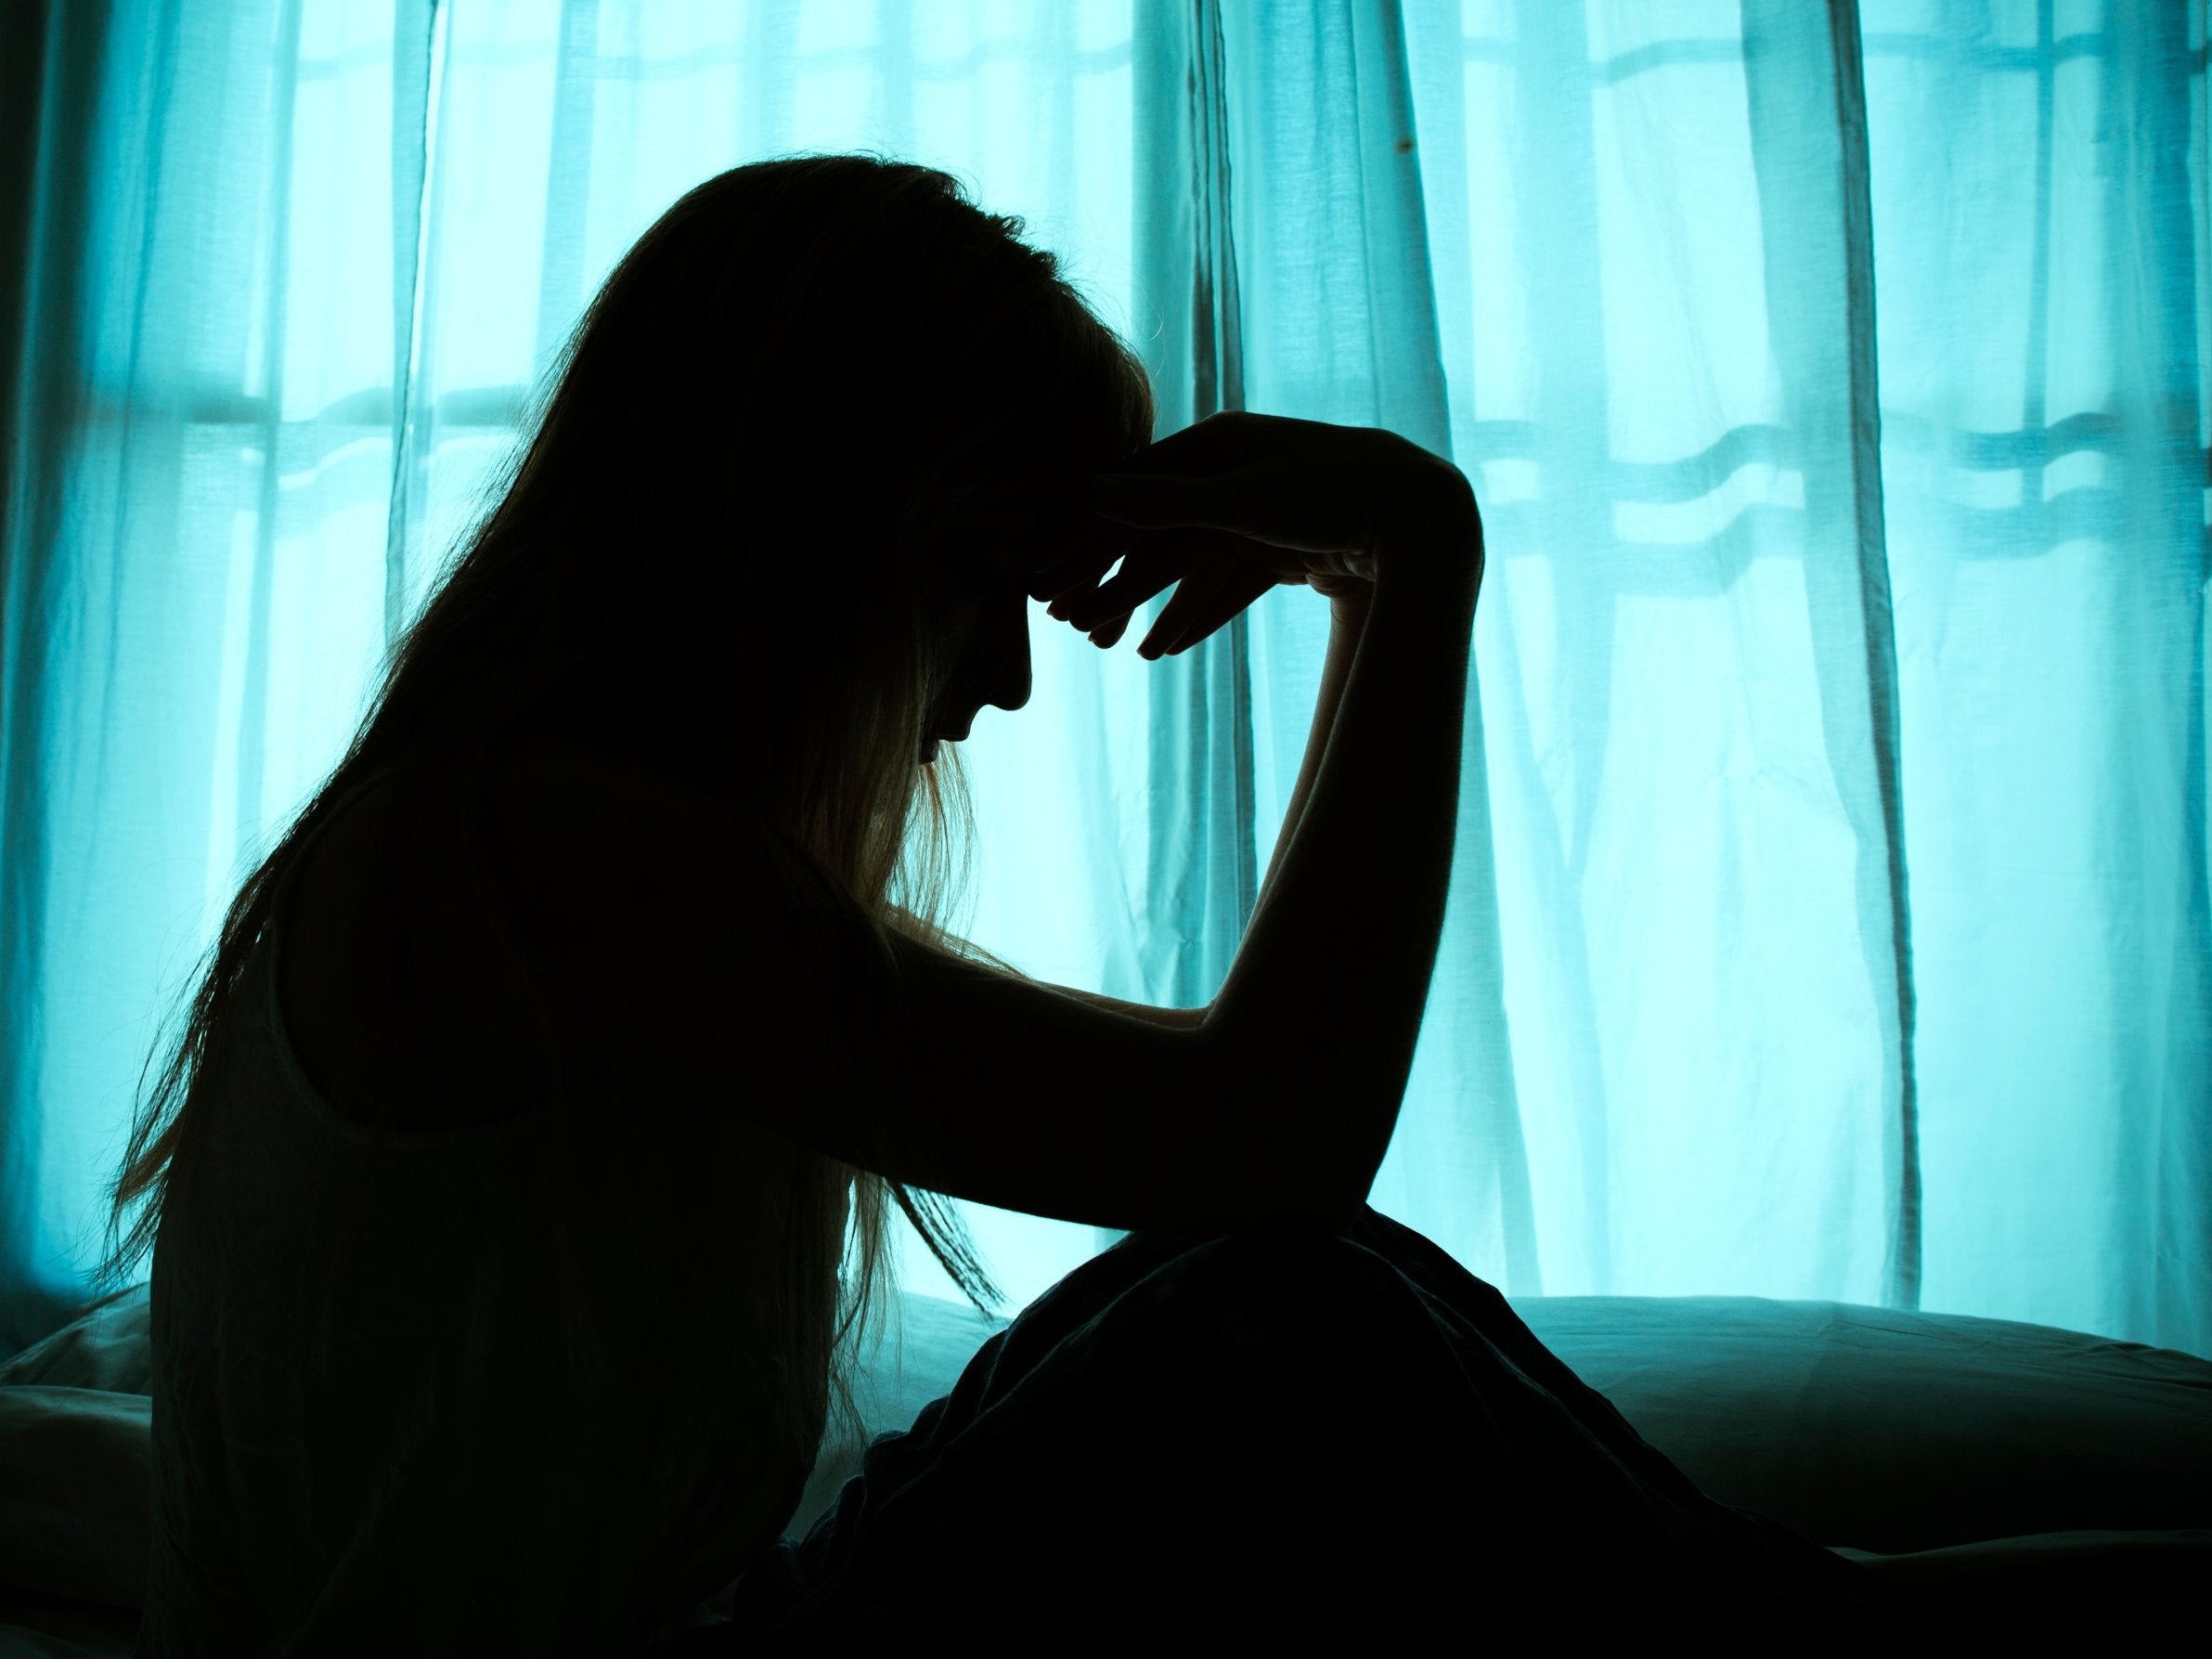 The report discovered women who have been subjected to abuse from their partners are almost twice as likely to develop fibromyalgia and chronic fatigue syndrome than people who have not